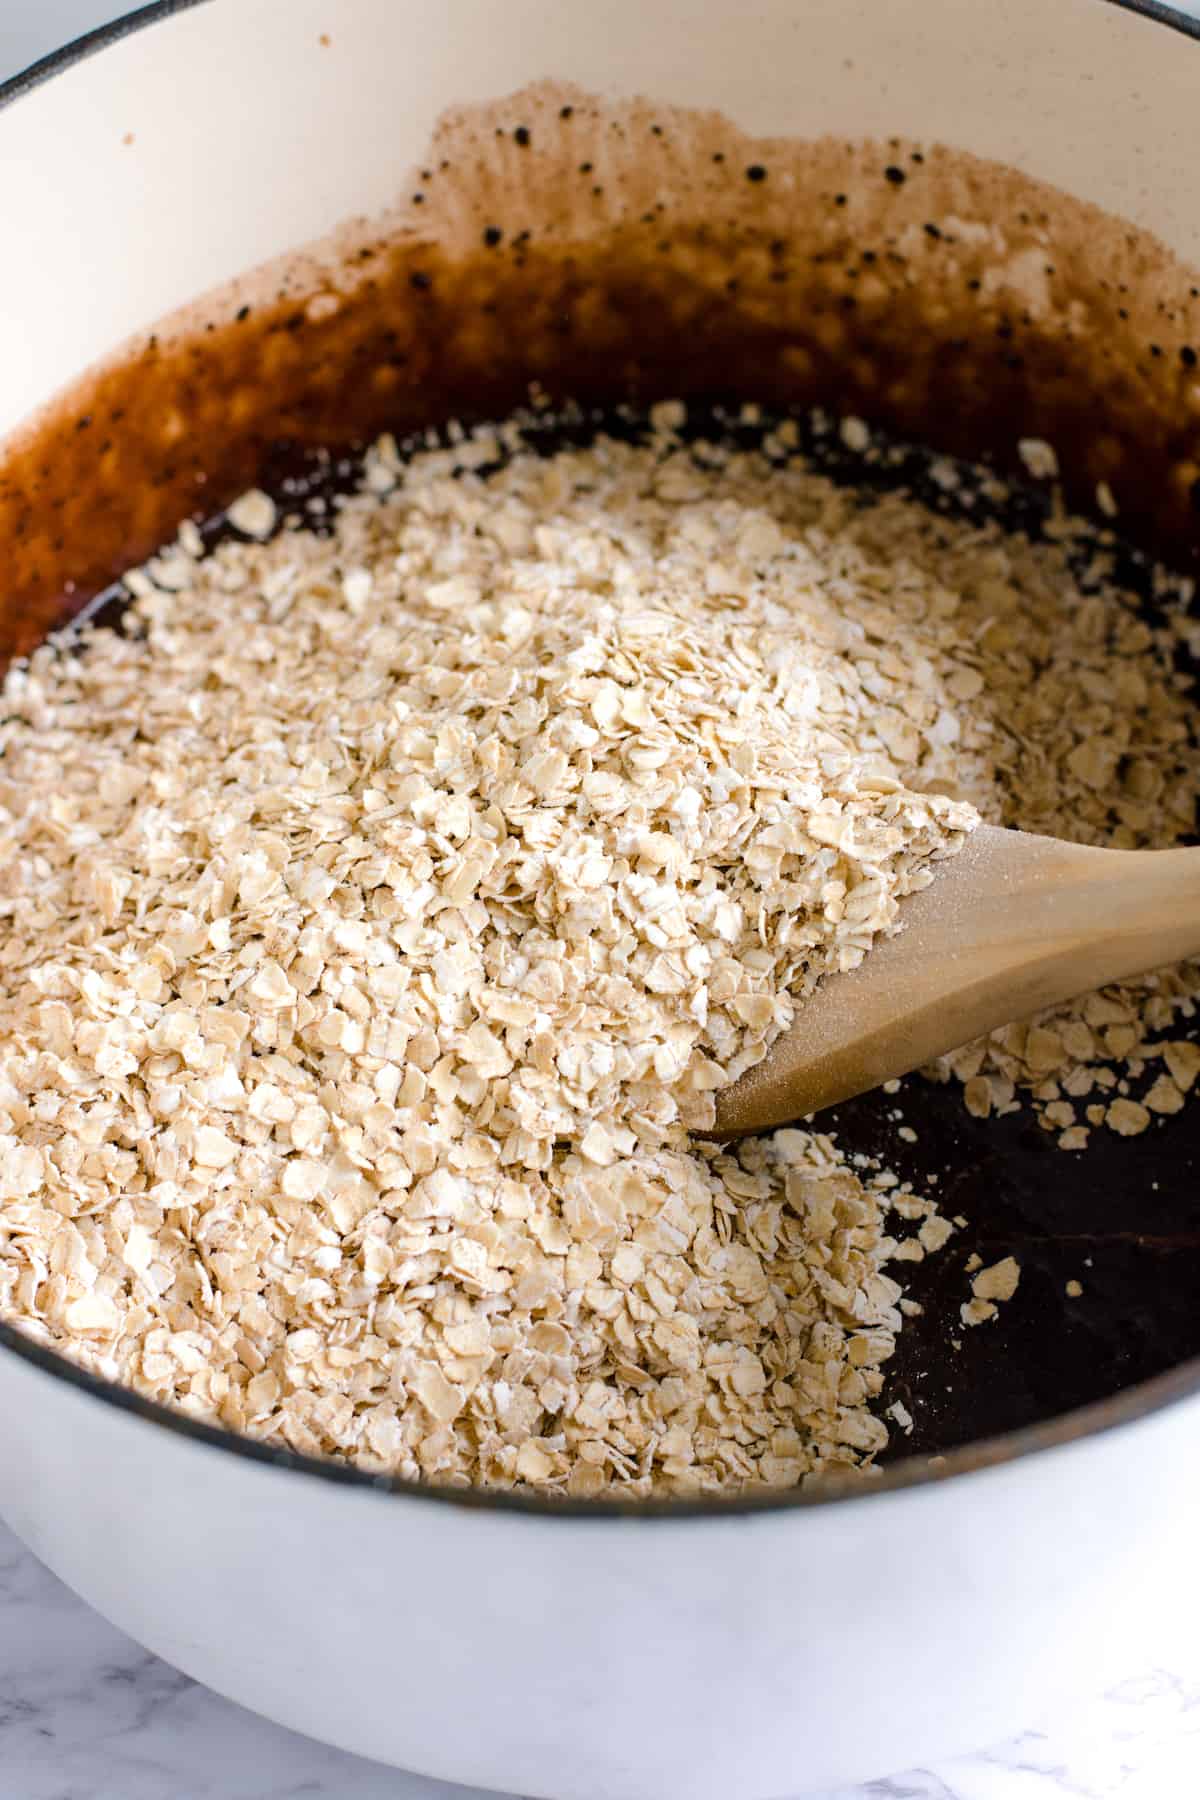 3 cups of oats added to saucepan.